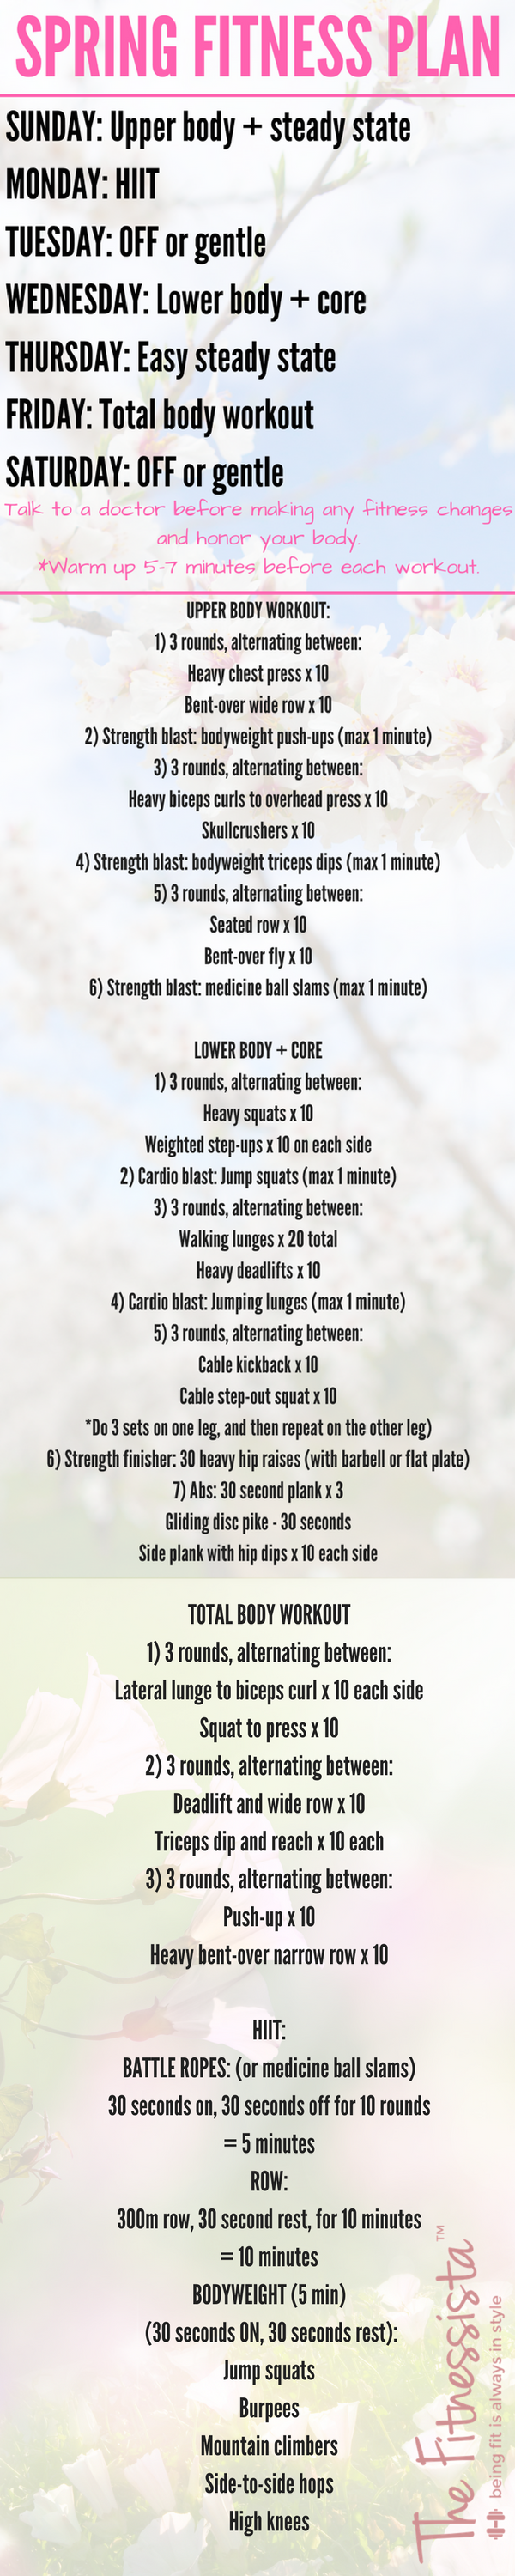 A full workout plan including strength, cardio, flexibility and rest. It's easy to hit a spring workout slump, and this takes all of the planning out of it for you! Check out the full details at fitnessista.com 